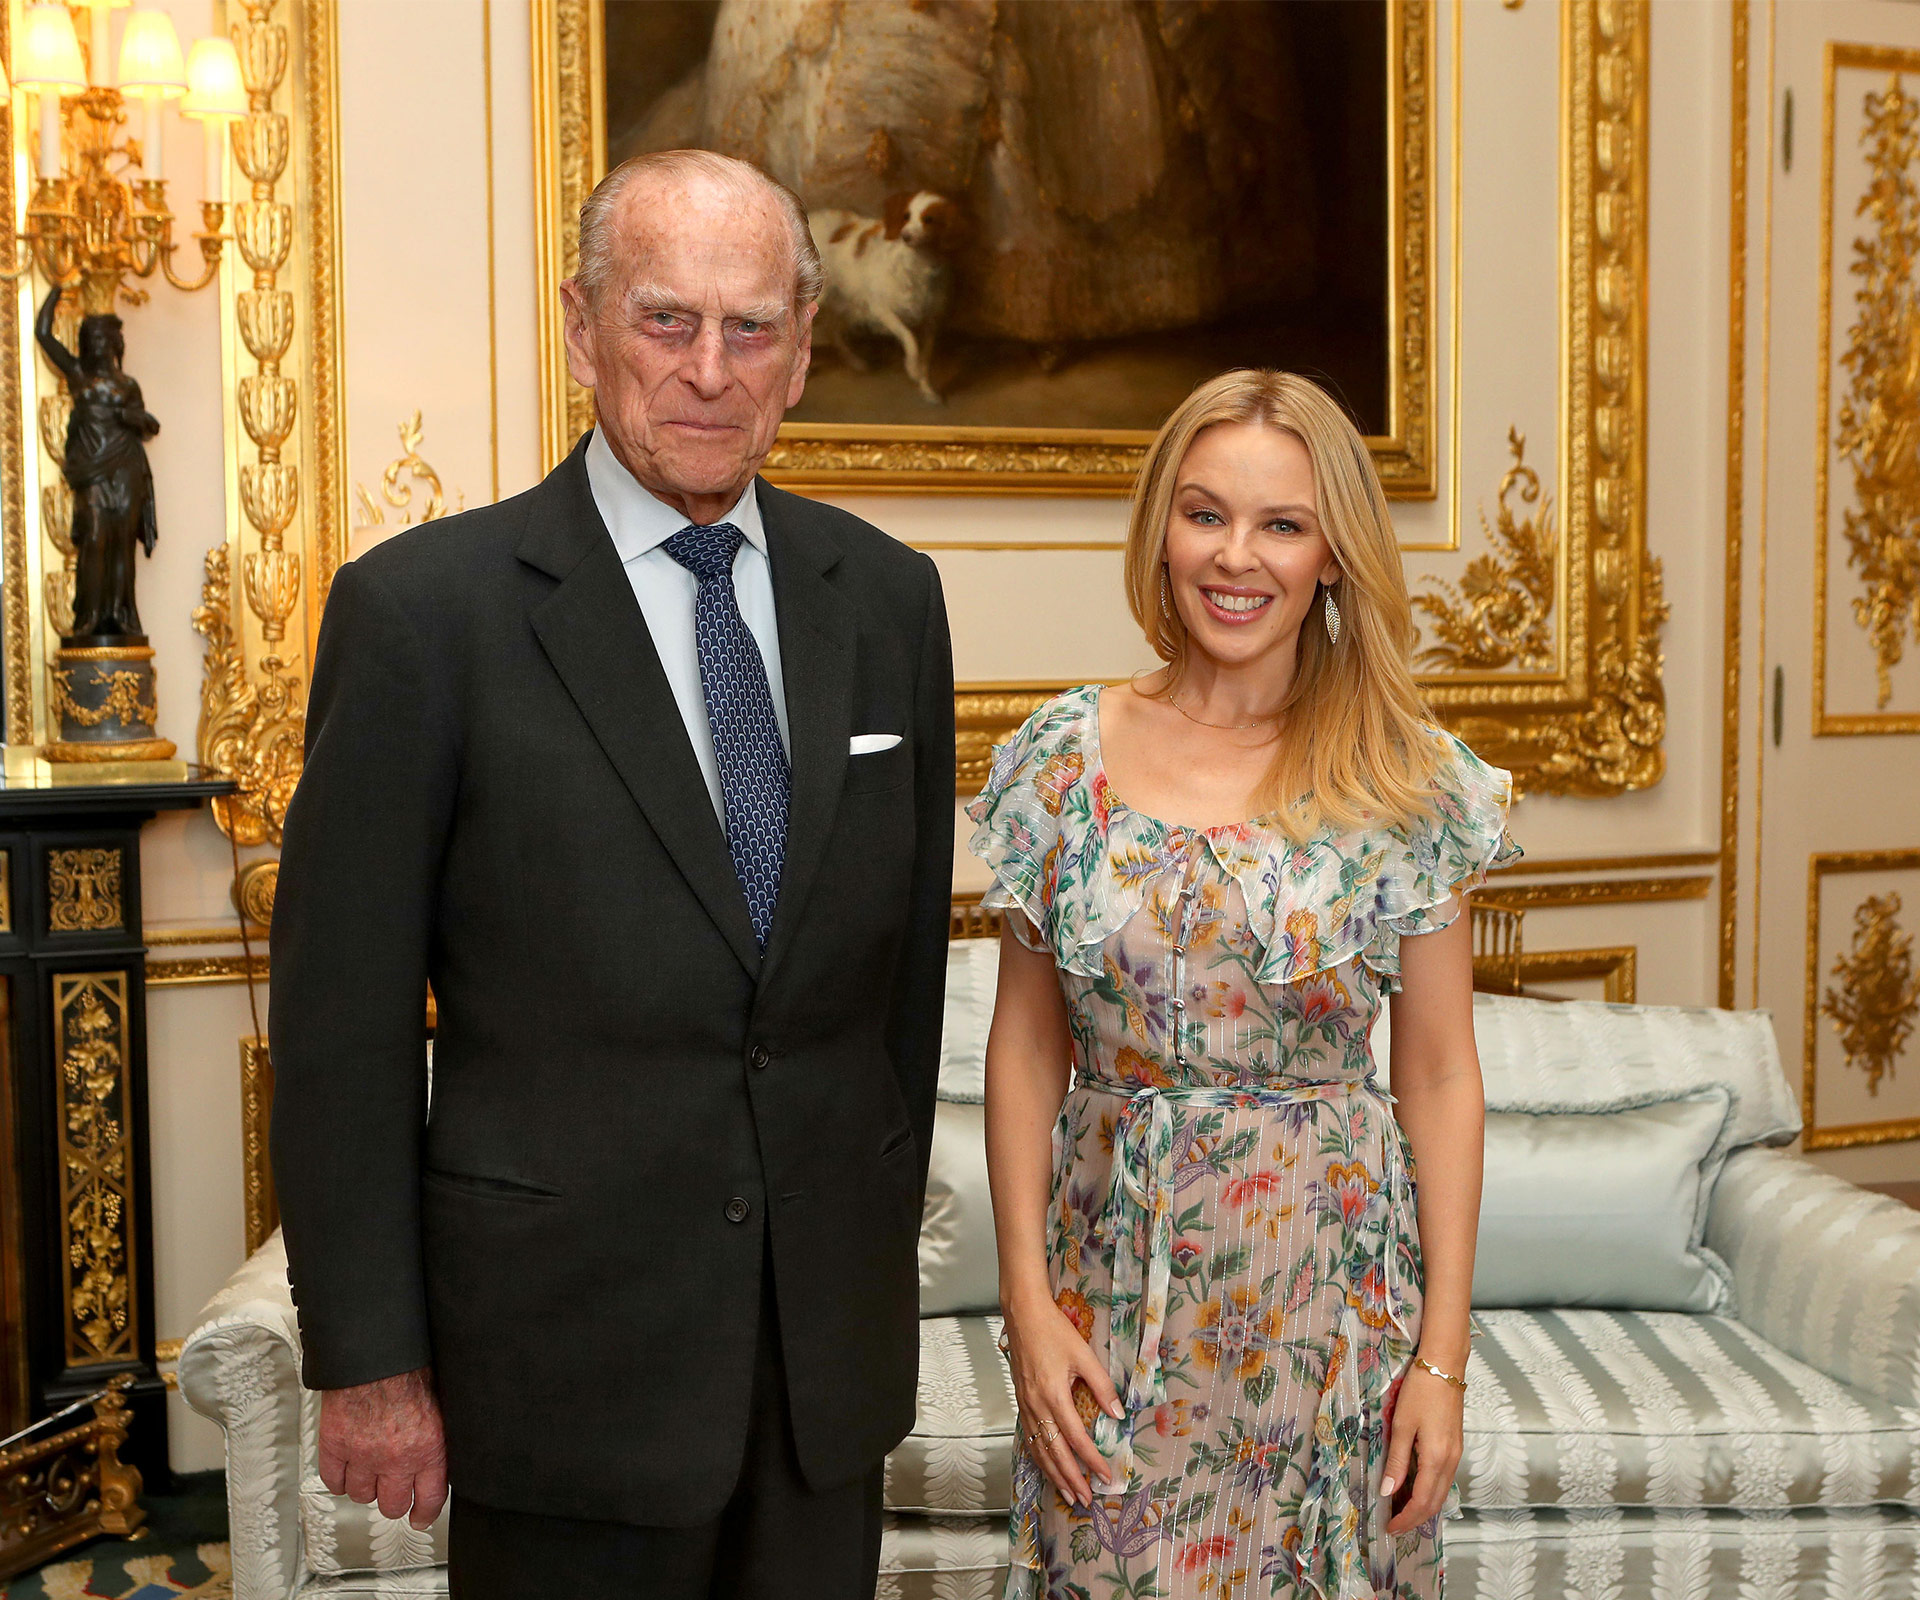 Kylie Minogue and Prince Philip